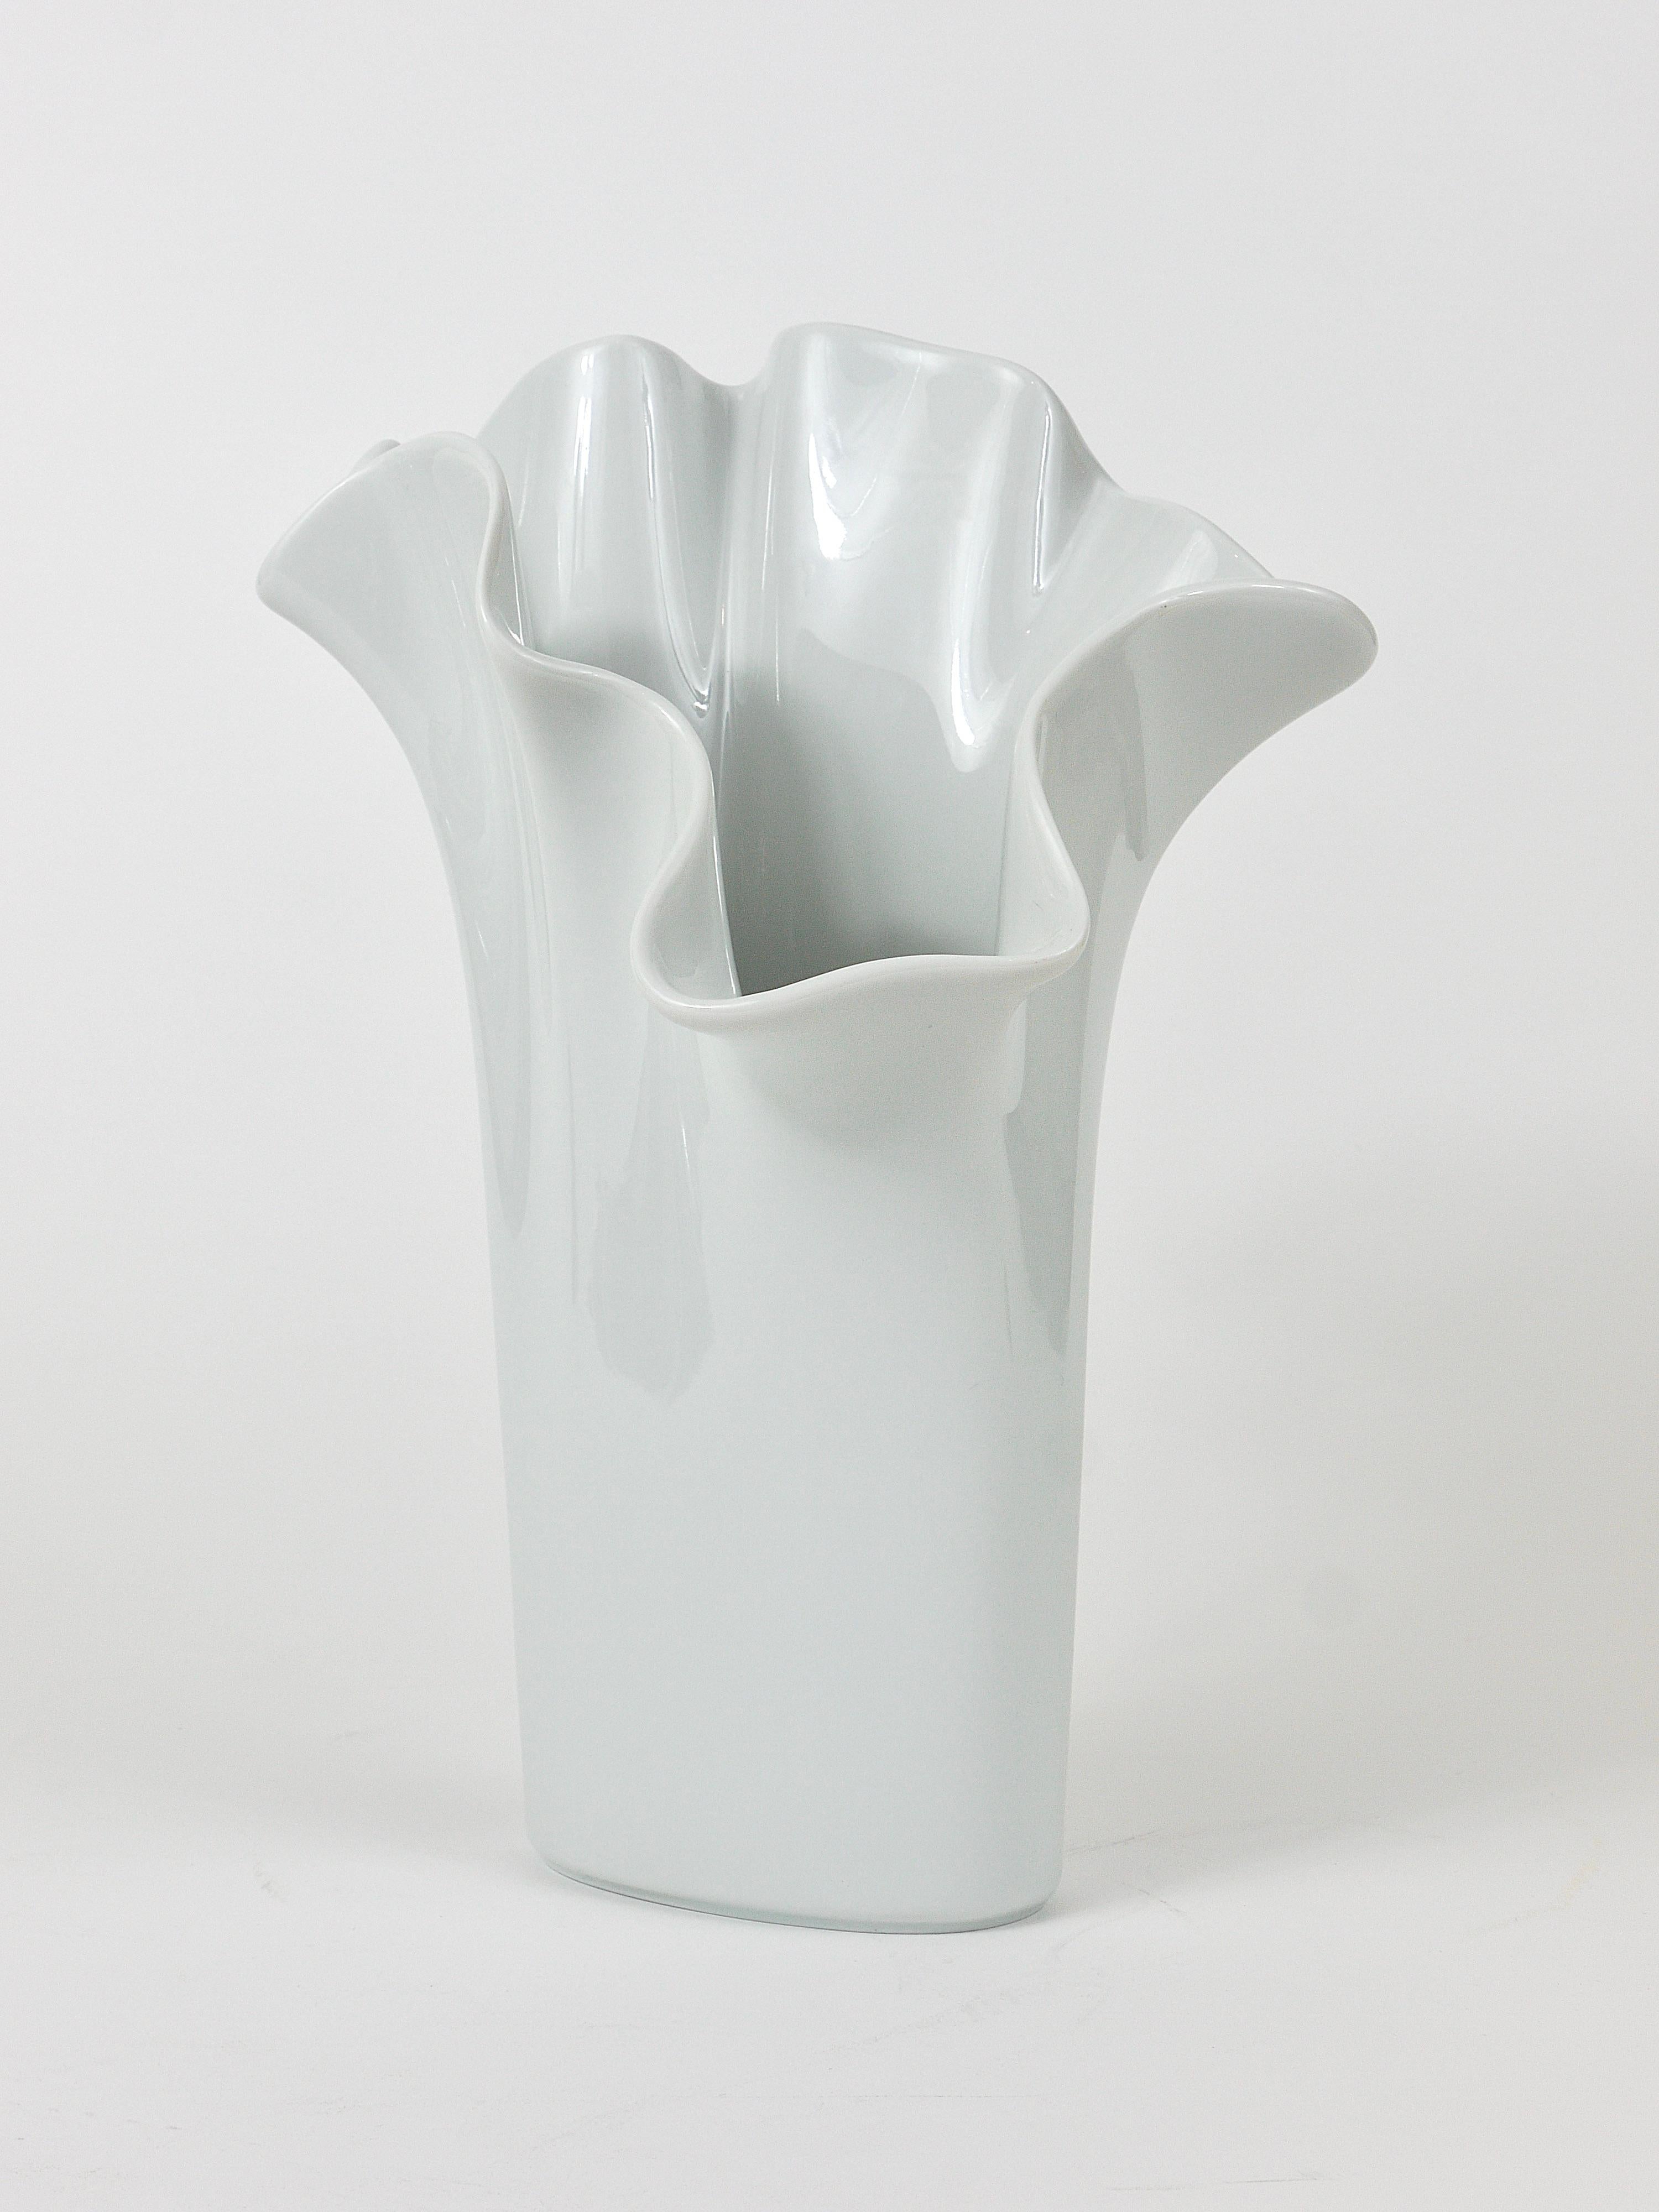 Mid-Century Modern Rosenthal Studio-line Fazzoletto Asym Vase by Claus Josef Riedel, Germany, 1970s